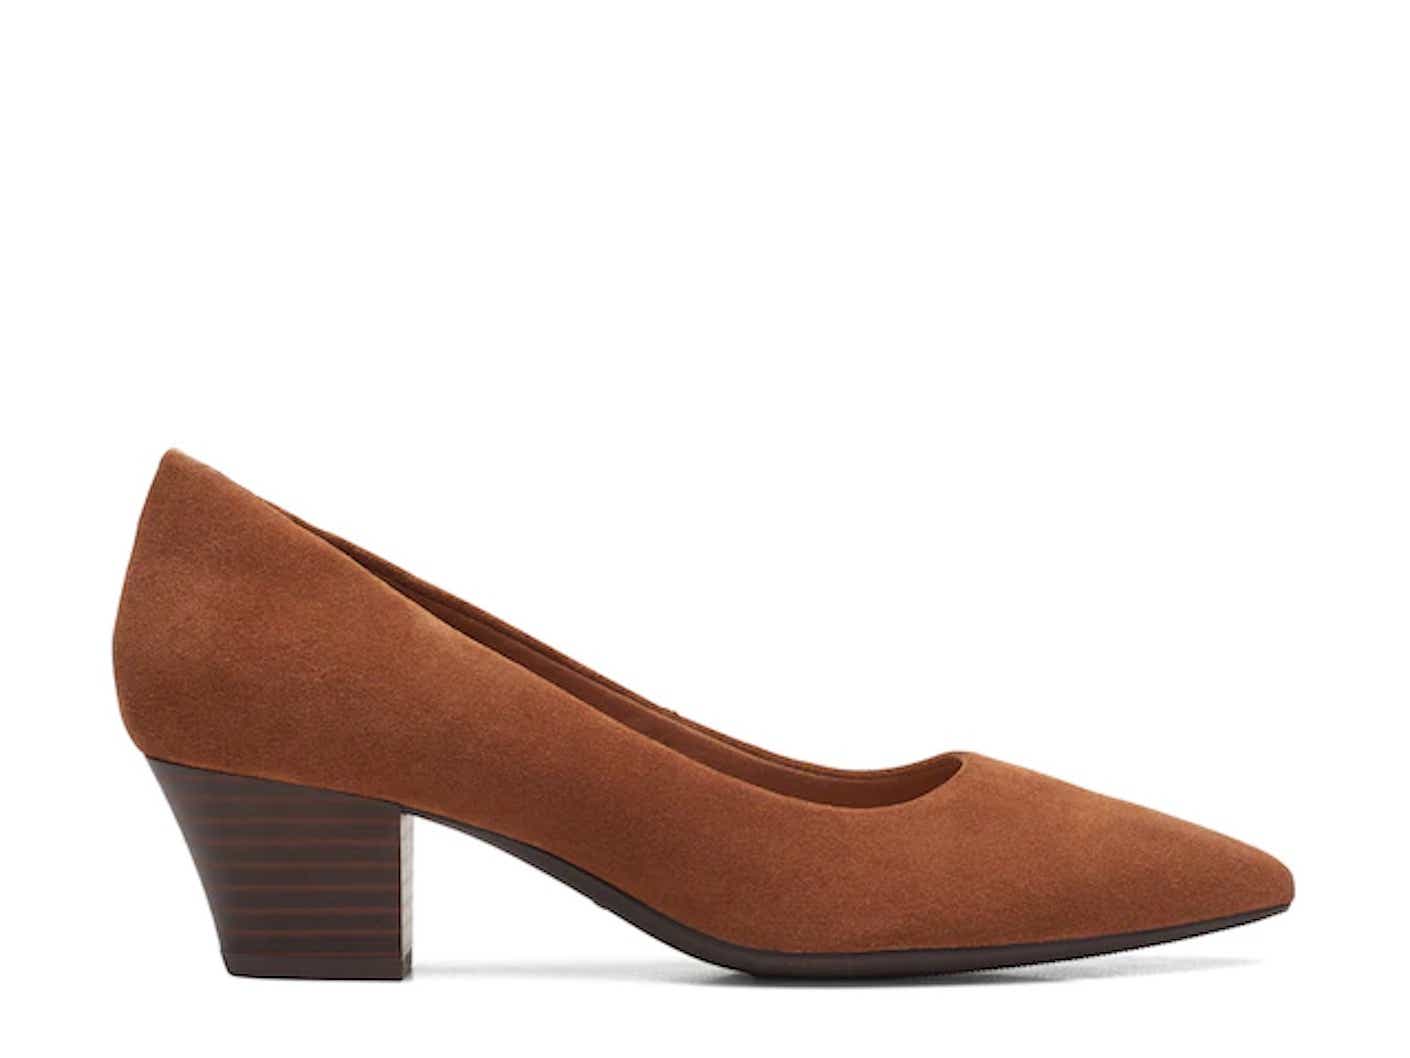 A chesnut brown, heeled pump pictured in front of a white background.